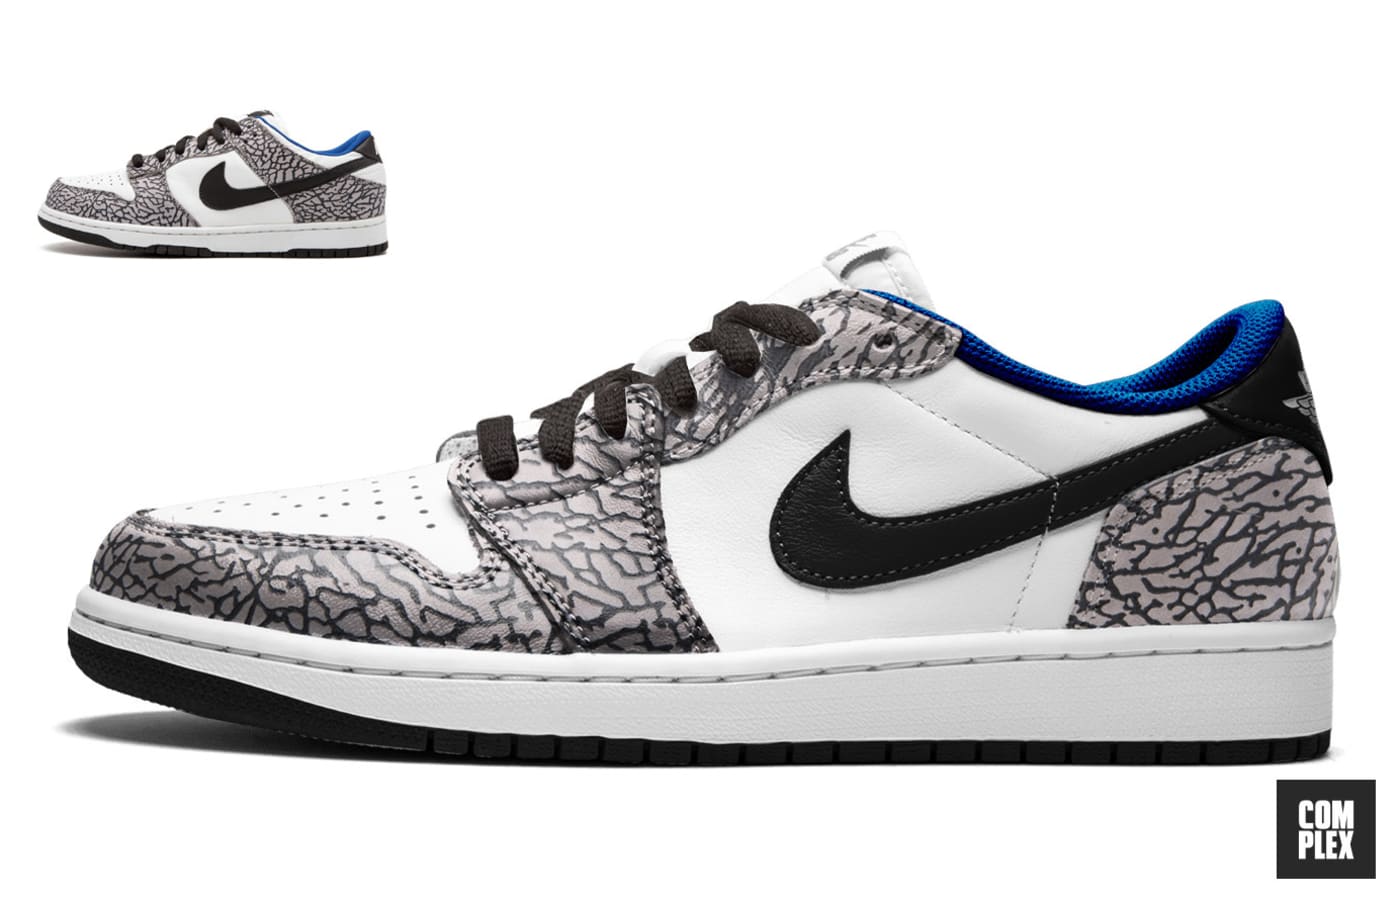 first official collaboration between jordan and nike sb